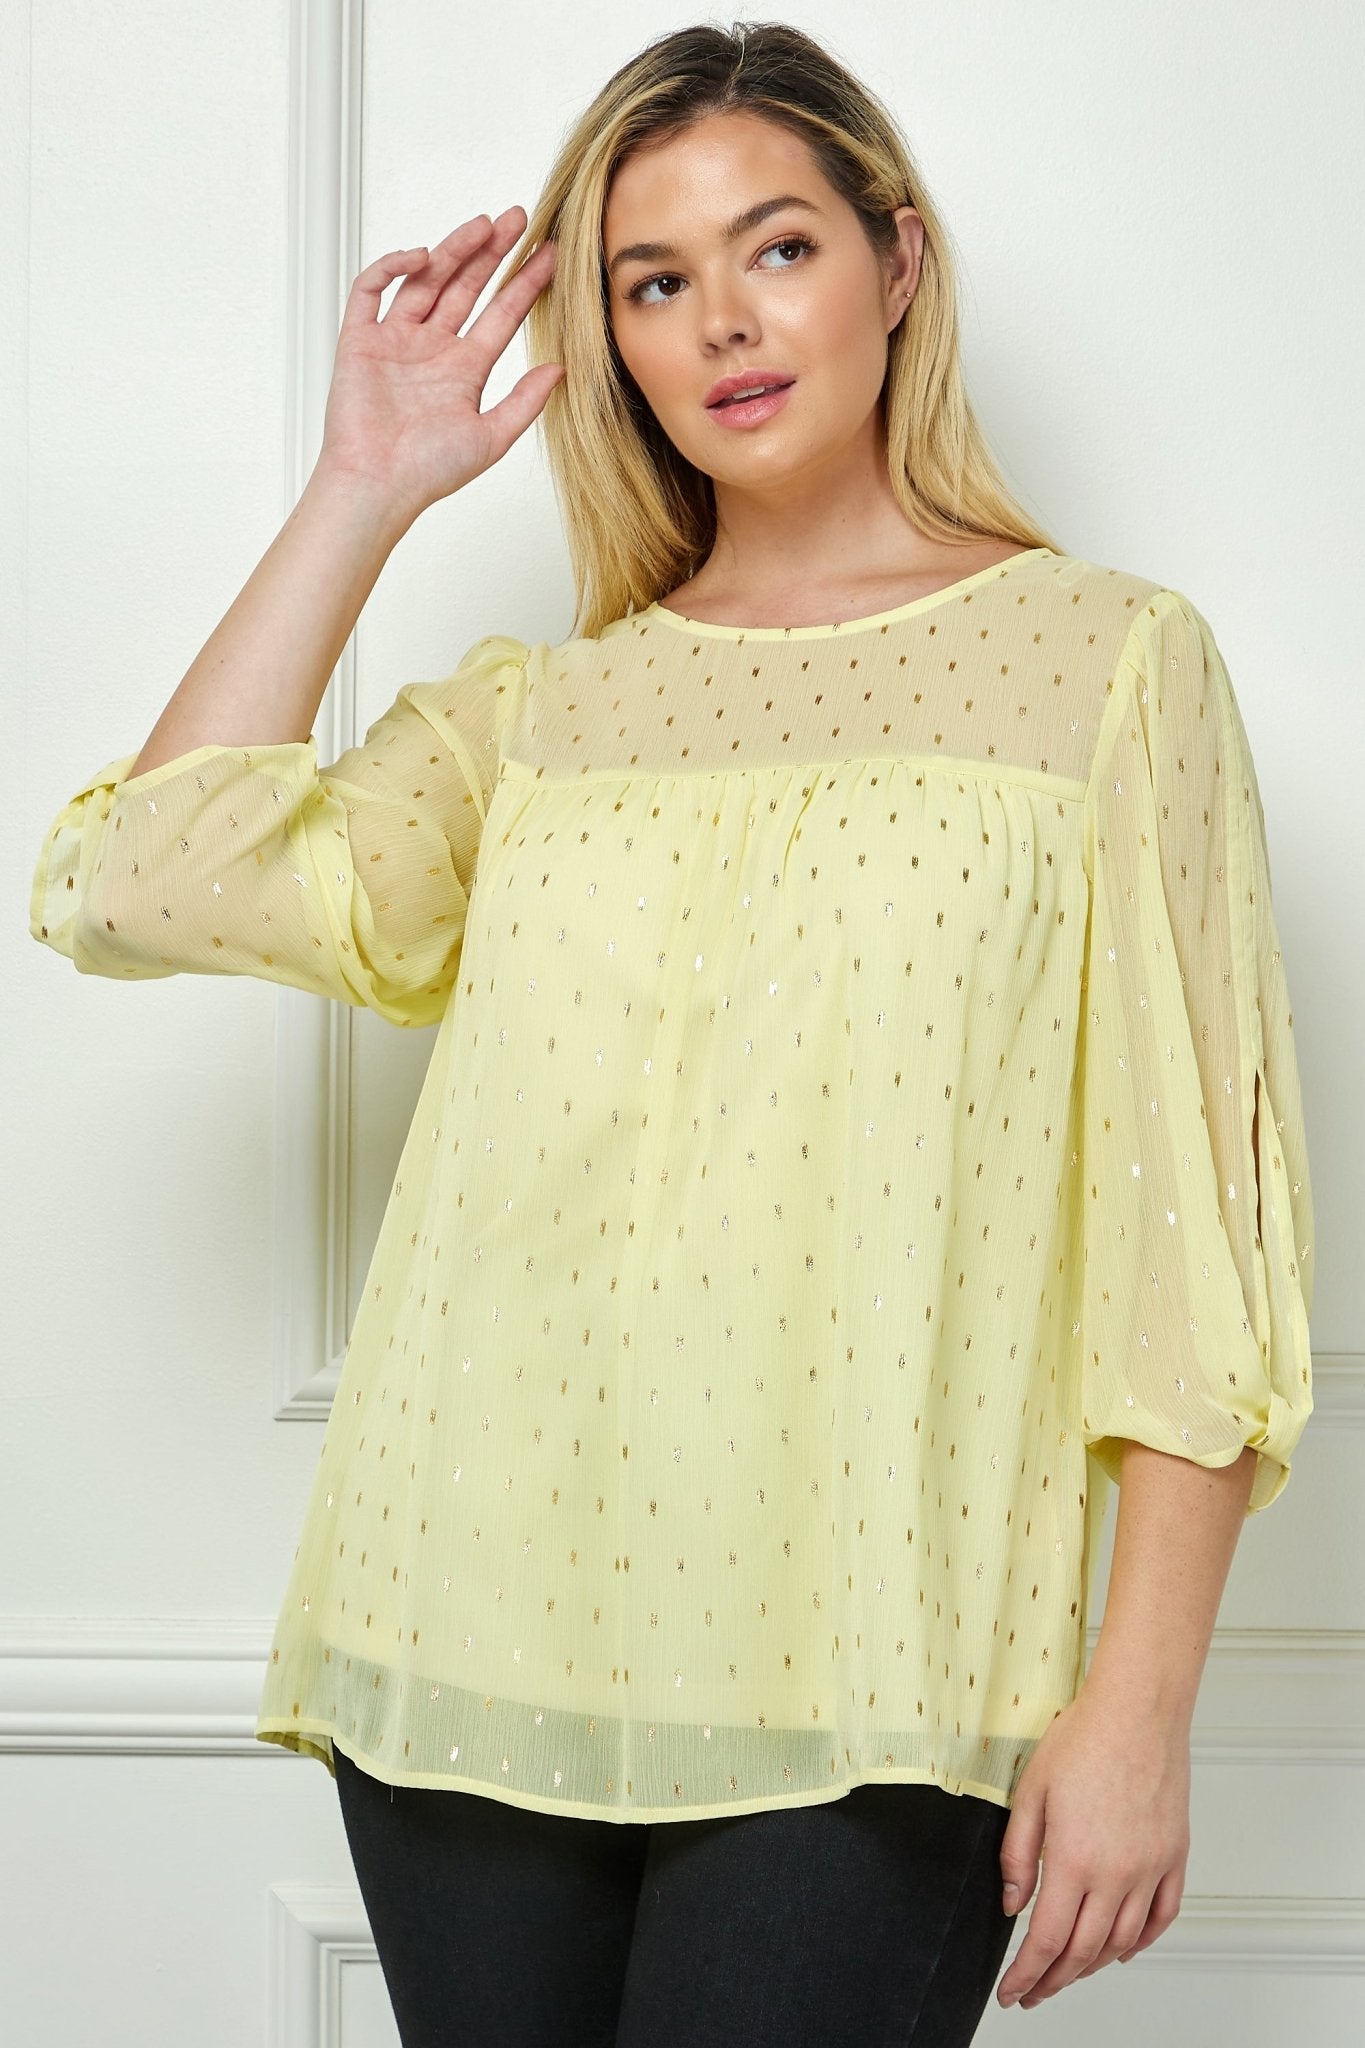 Sara Michelle Chamois & Gold 3/4 Knot Sleeve Scoop Neck Lined Blouse - Plus - DressbarnShirts & Blouses